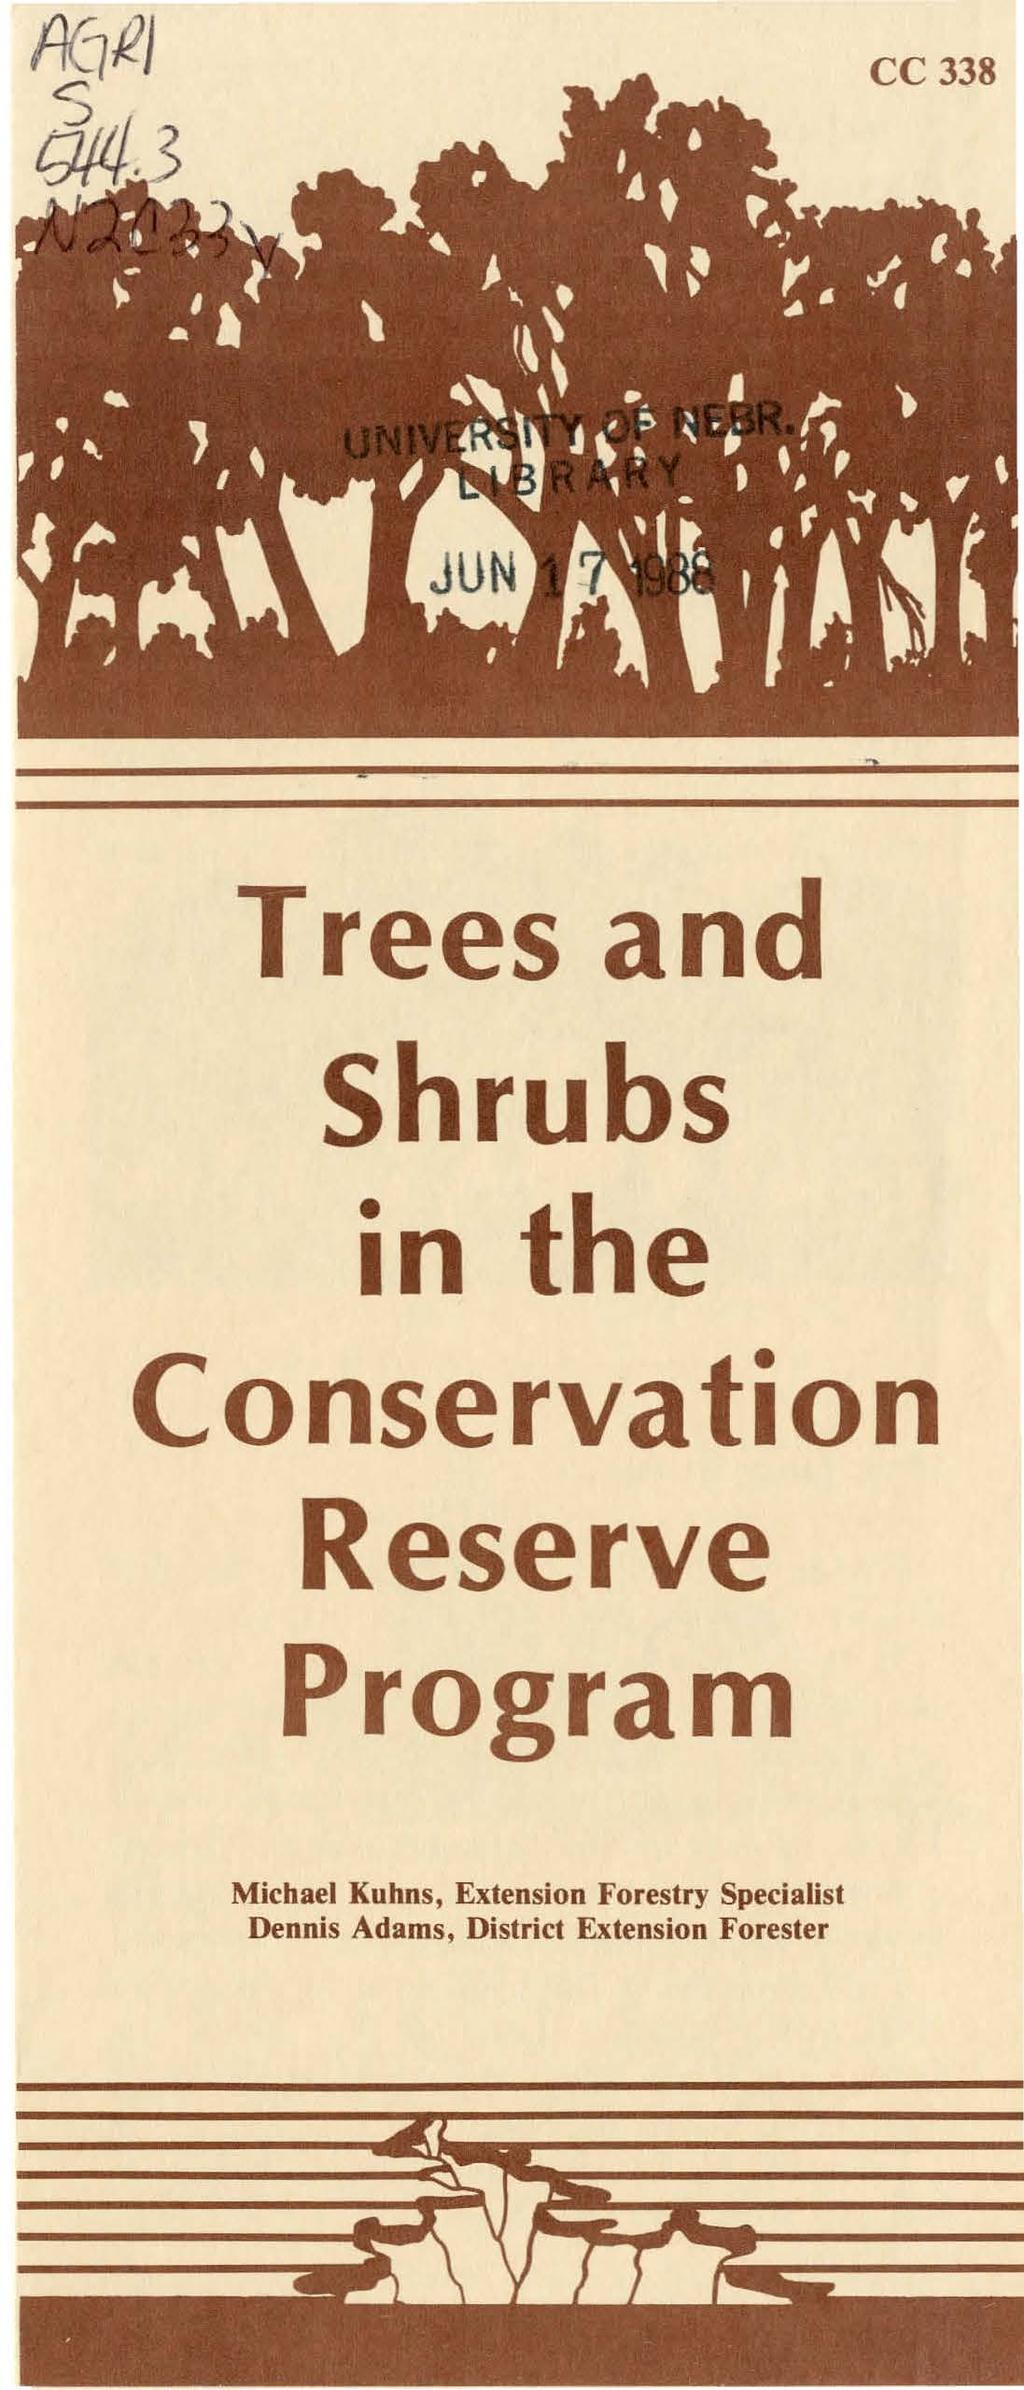 cc 338 Trees and Shrubs in the Conservation Reserve Program Michael